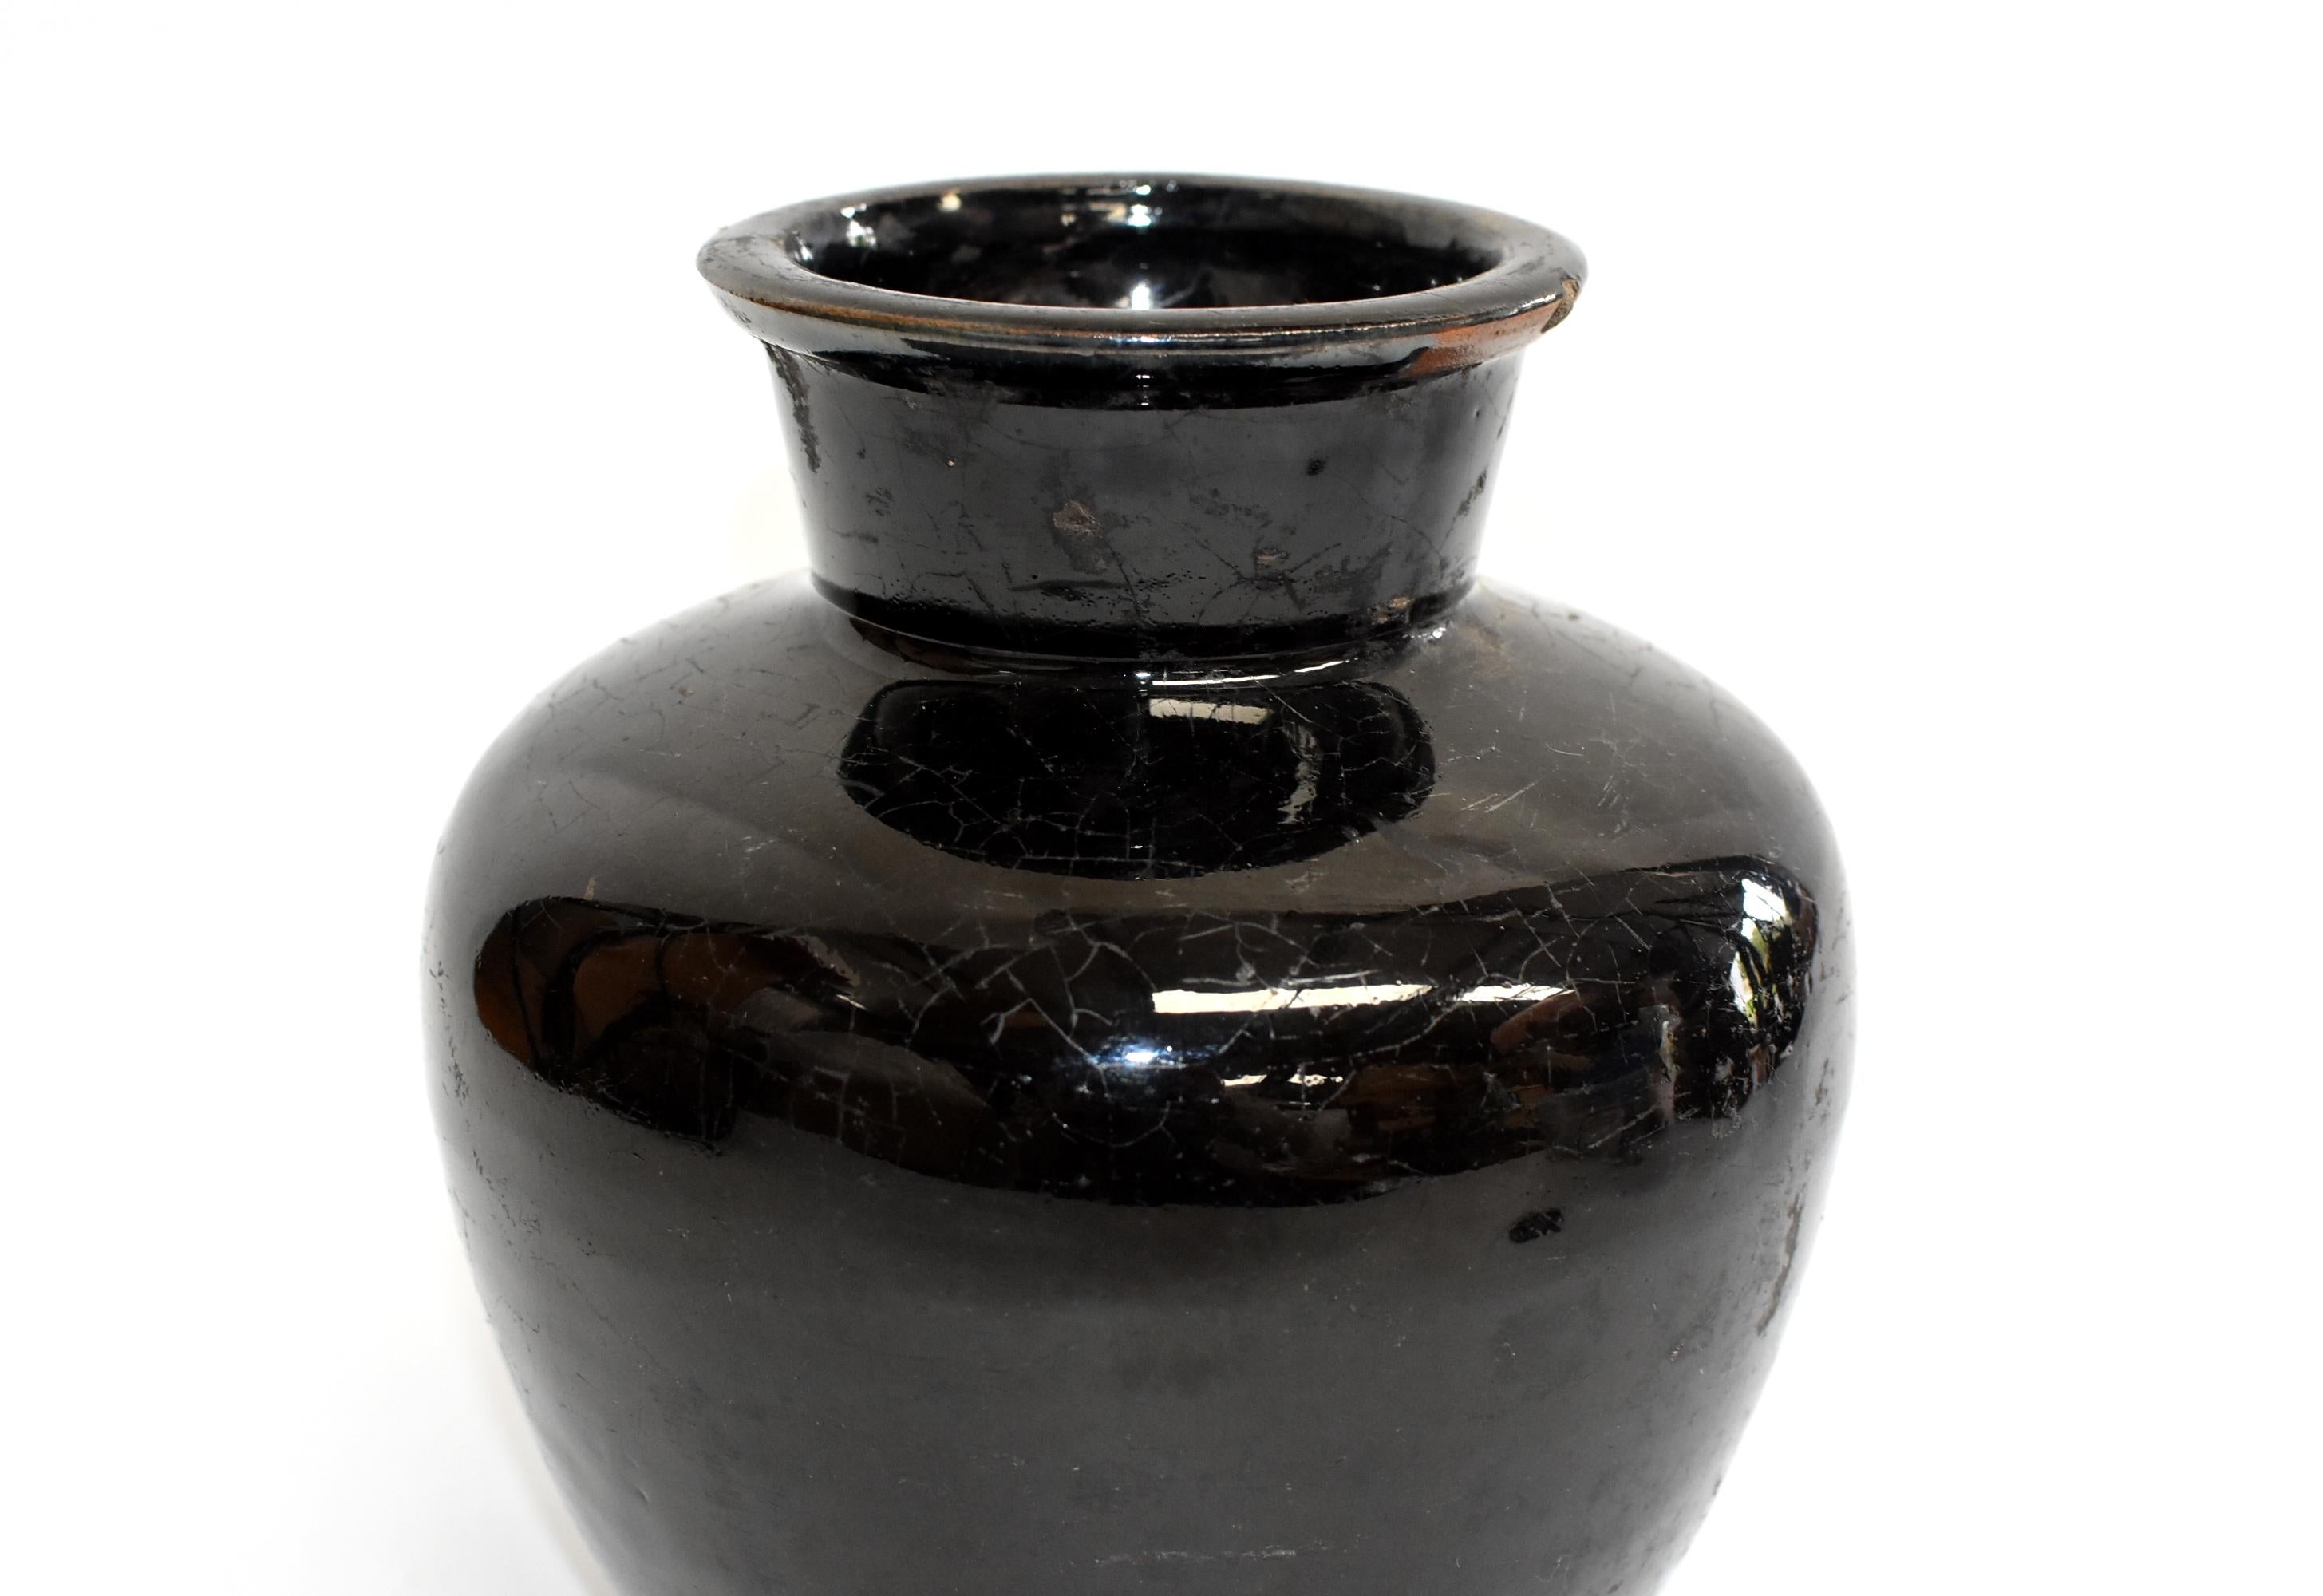 This wonderful piece is from Shan Xi province, an ancient state of China. The area is famous for producing rich, aromatic, dark vinegar. Historically these jars were used to store the prized liquids. Now, their rustic, artistic appeal with the